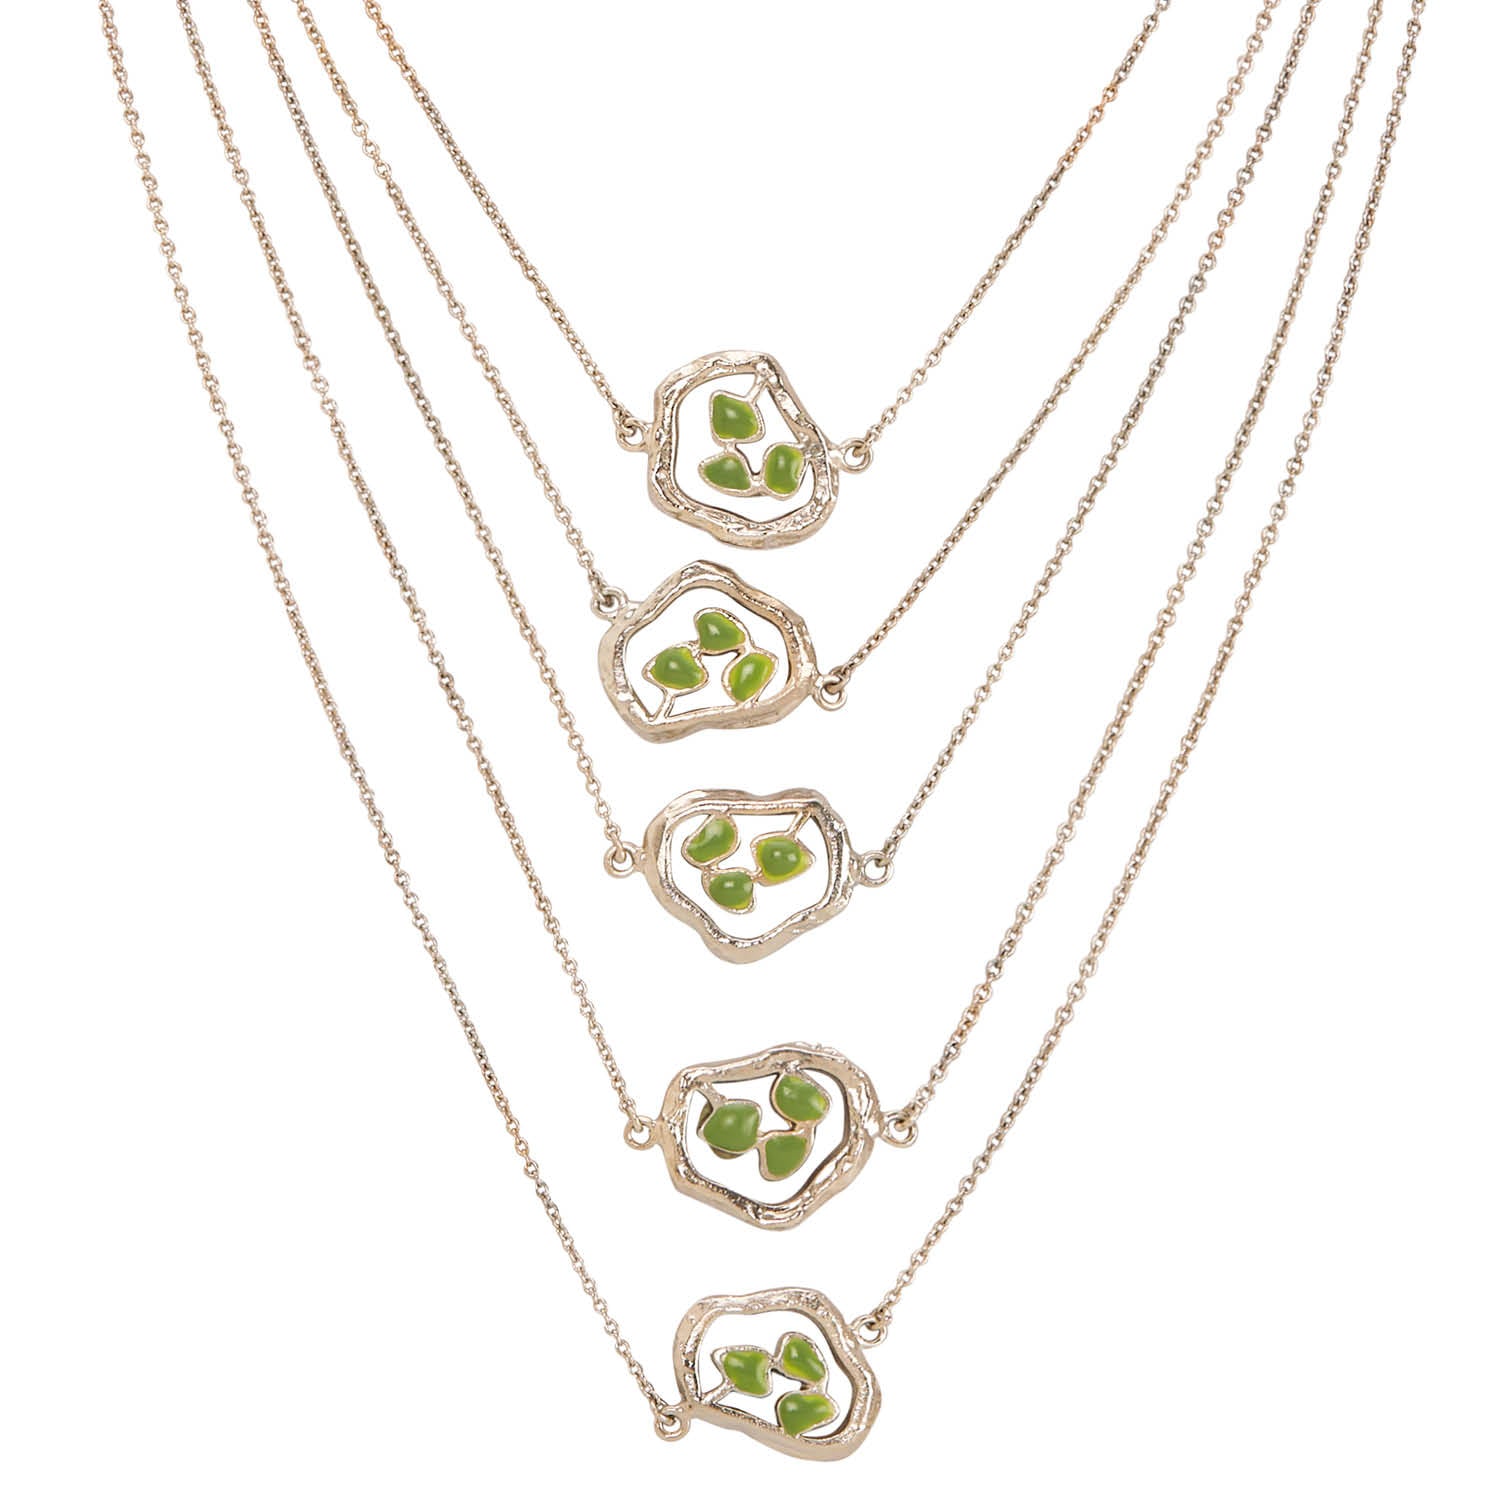 TERRA LAYERED NECKLACE